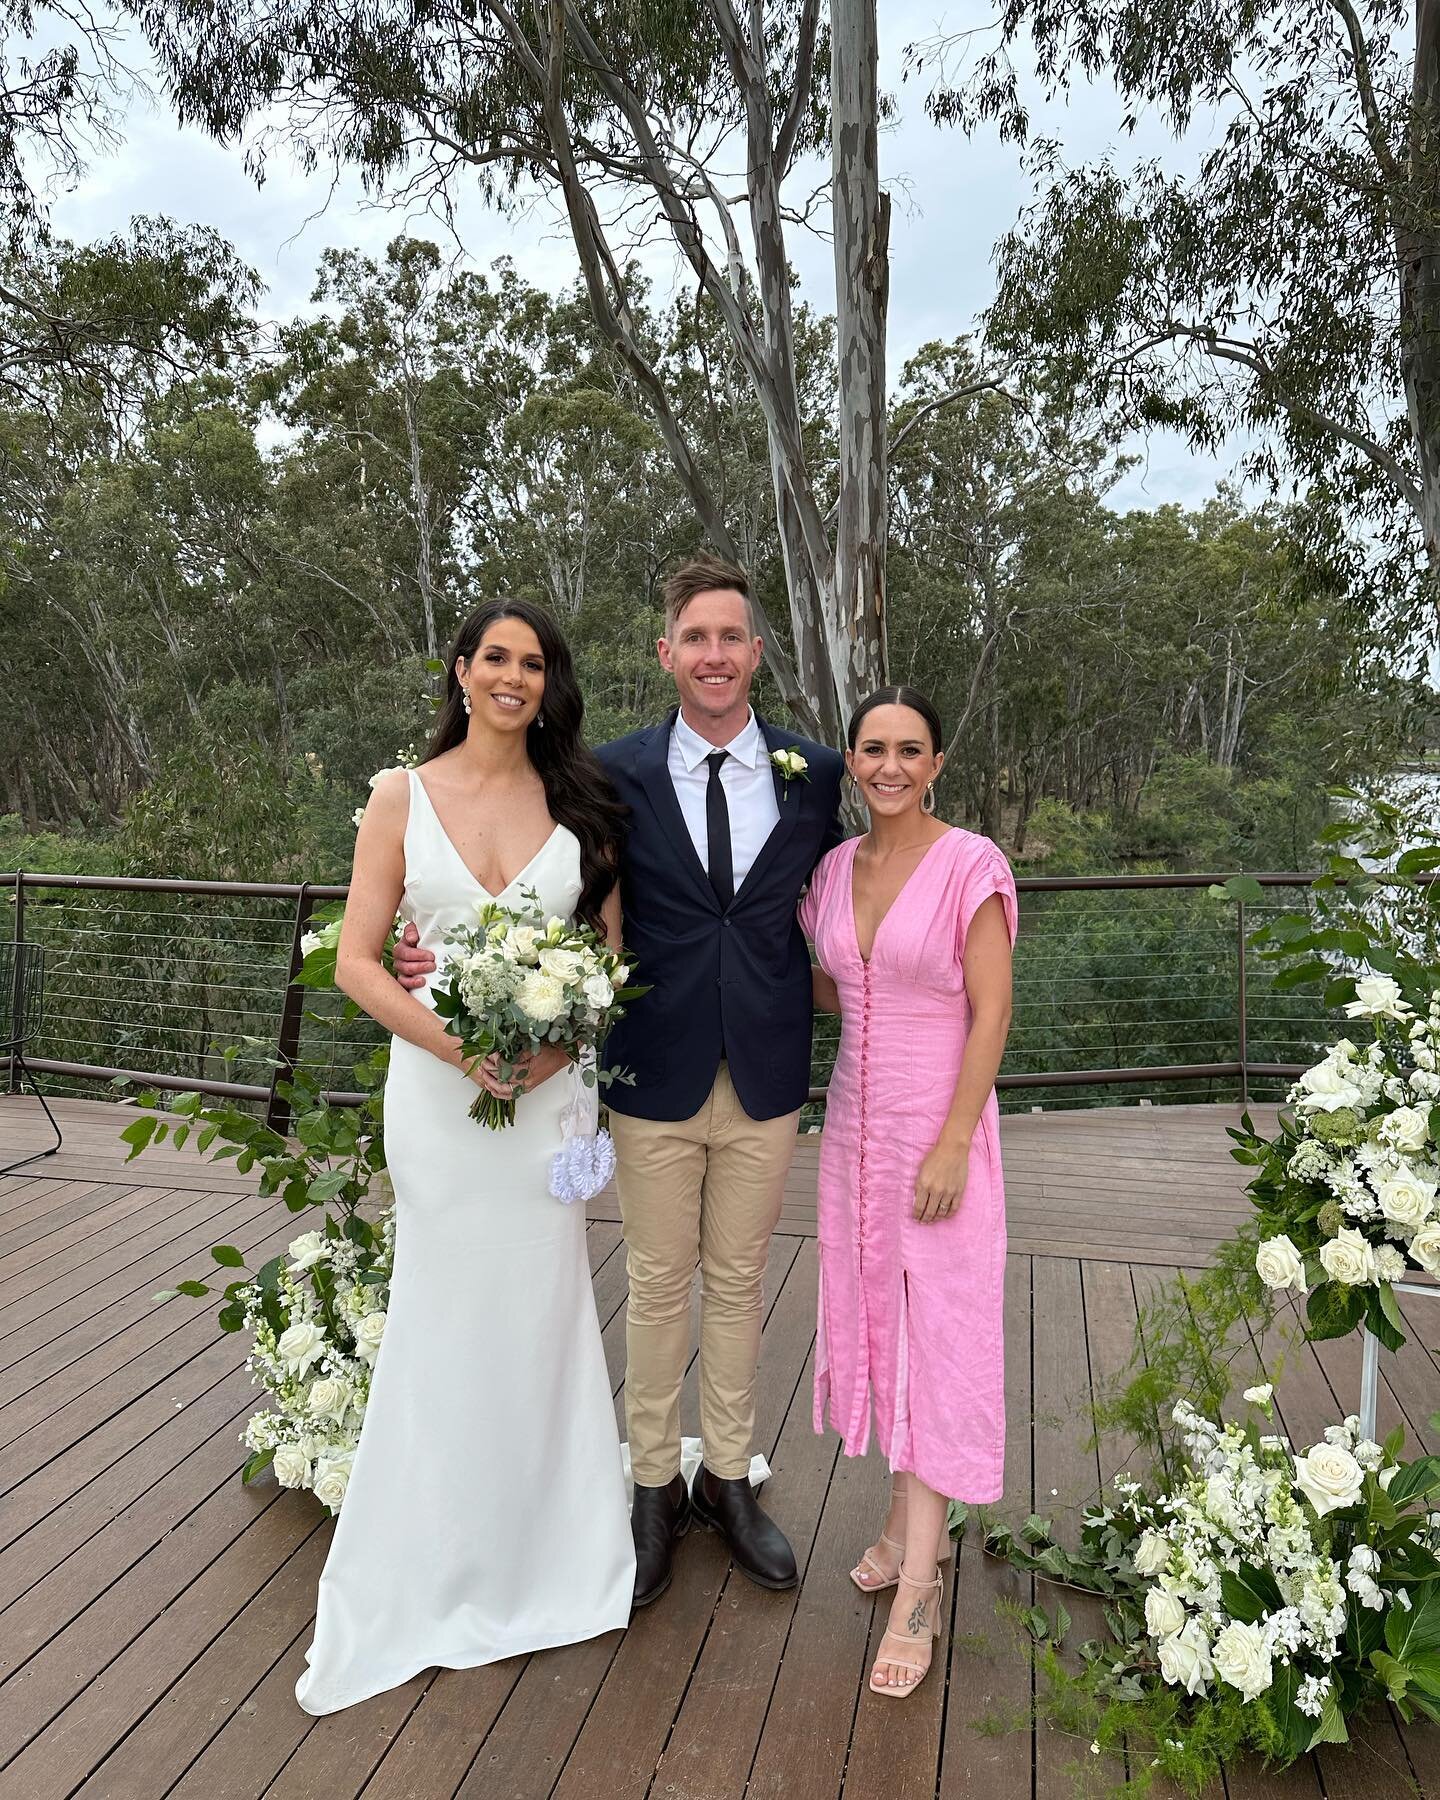 🖤 𝐌𝐫 &amp; 𝐌𝐫𝐬 𝐖𝐢𝐭𝐦𝐢𝐭𝐳 🖤

Just over a week ago I had the pleasure of pronouncing the lovely Sam &amp; Steph as husband &amp; wife. 

I may look small standing next to you two but certainly didn&rsquo;t feel it on the inside. Sam &amp; S